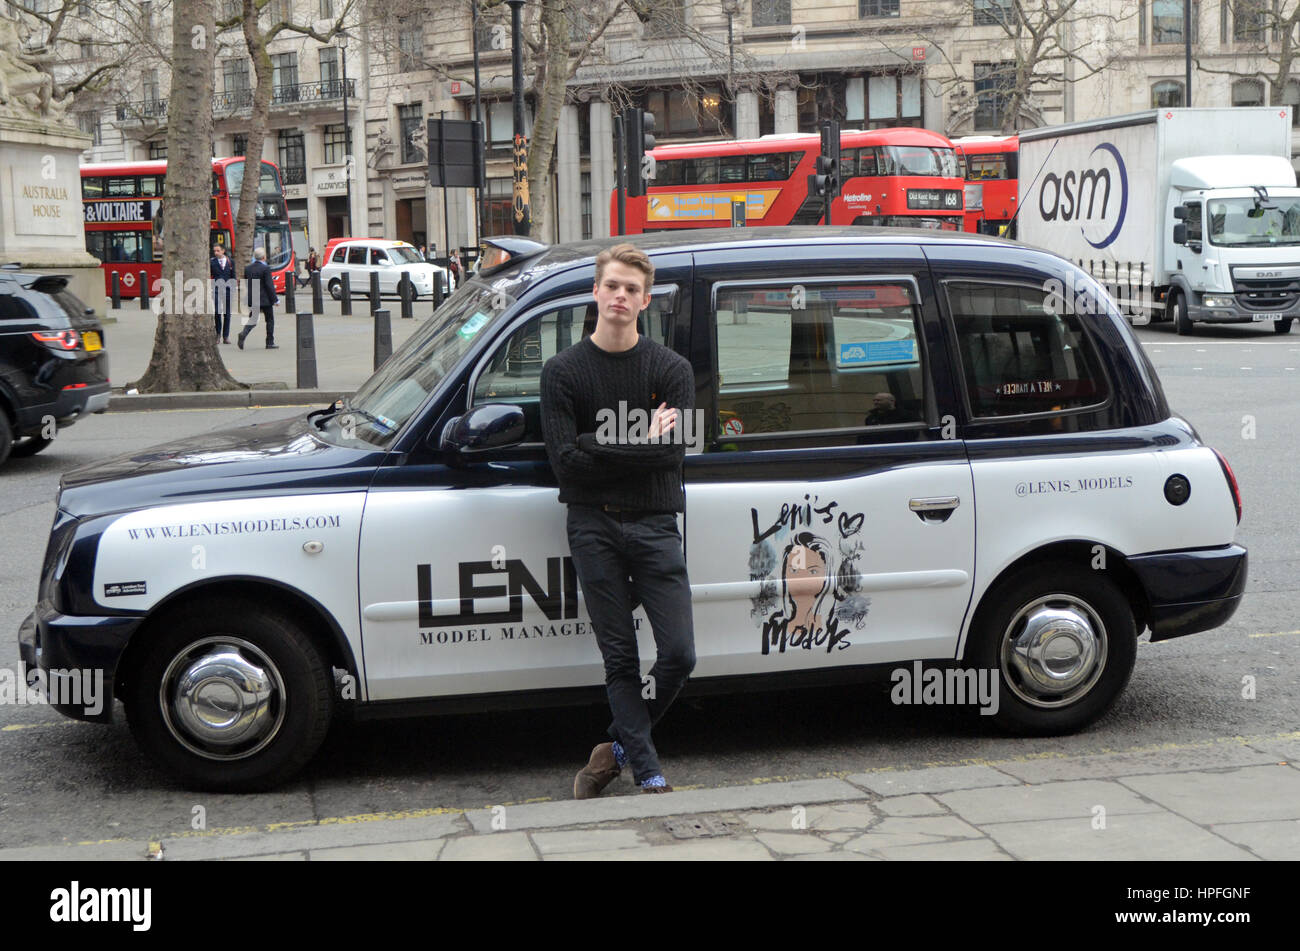 London, UK. 21st Feb, 2017. Lenis models black cab, taxi. Last day of London  Fashion week February 2017 at BFC Show & presentation Space The Store  Studios 180 Strand London WC2R 1EA